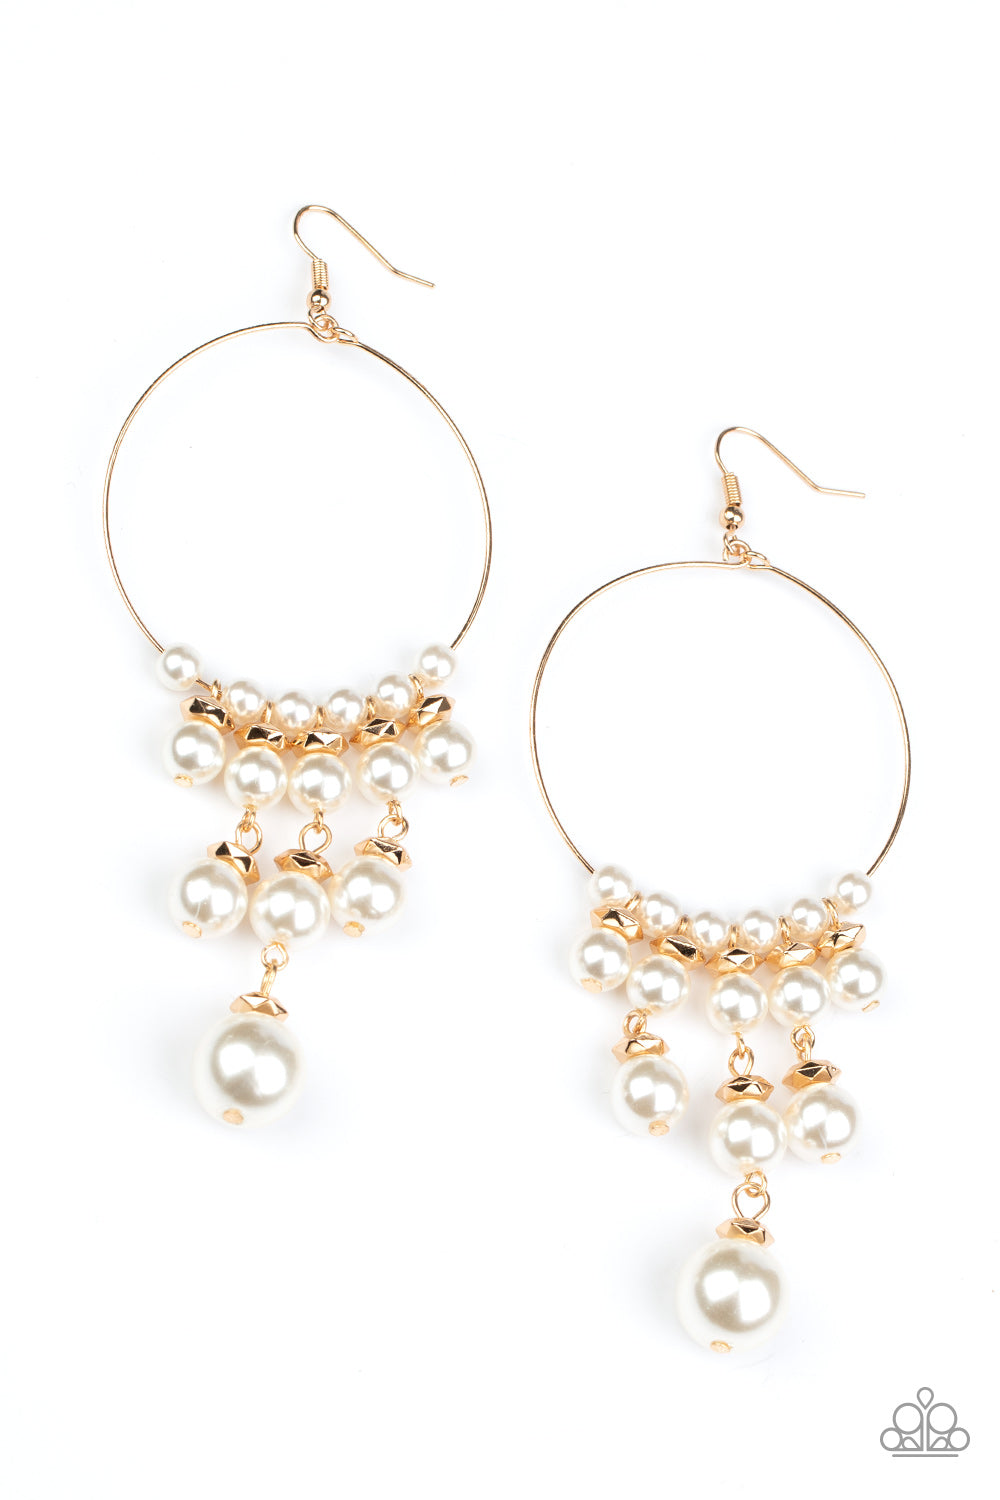 &lt;P&gt;Tiers of faceted gold beads and bubbly white pearls dangle from the bottom of a dainty gold wire hoop, creating an elegant fringe. Earring attaches to a standard fishhook fitting.&lt;/P&gt;  

&lt;P&gt; &lt;I&gt;  Sold as one pair of earrings. &lt;/I&gt;  &lt;/P&gt;


&lt;img src=\&quot;https://d9b54x484lq62.cloudfront.net/paparazzi/shopping/images/517_tag150x115_1.png\&quot; alt=\&quot;New Kit\&quot; align=\&quot;middle\&quot; height=\&quot;50\&quot; width=\&quot;50\&quot;/&gt;